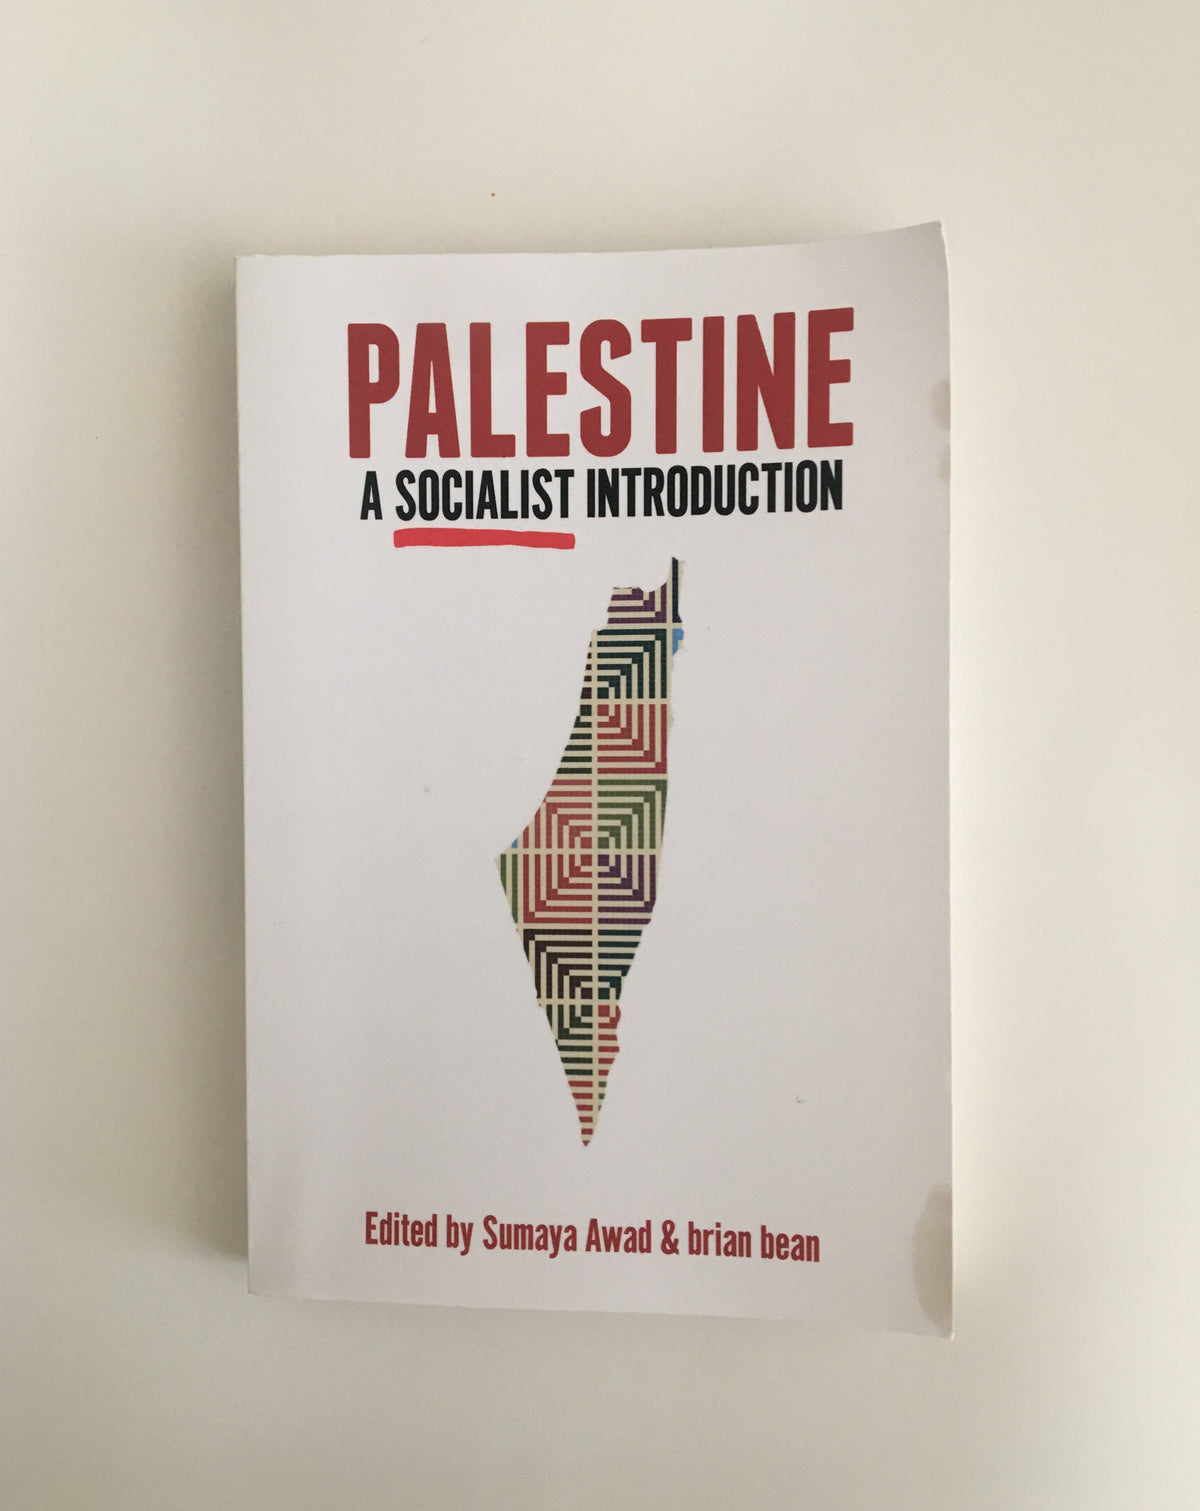 Palestine: A Socialist Introduction by Sumaya Awad and brian bean